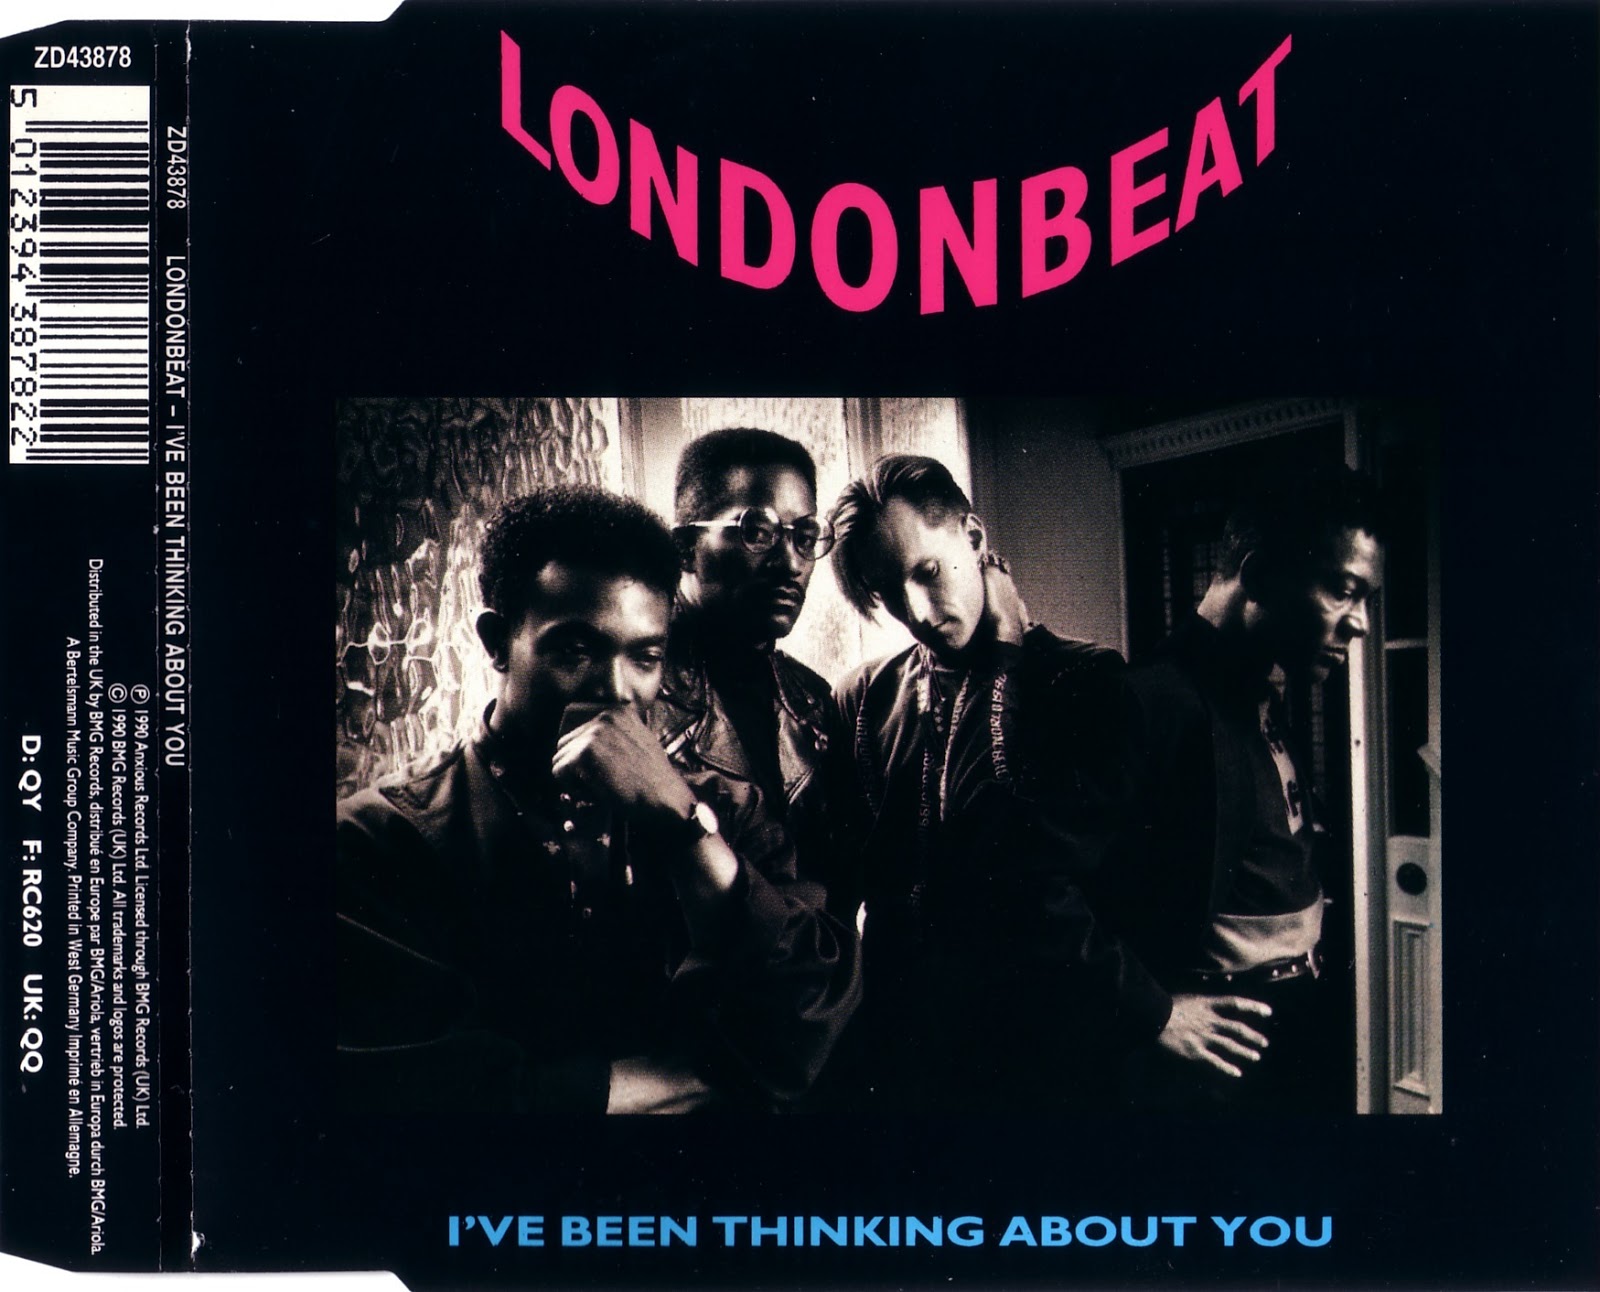 I ve been offered. Londonbeat обложка 1990. Londonbeat i've been thinking about you. Londonbeat фото. Londonbeat - in the Blood.